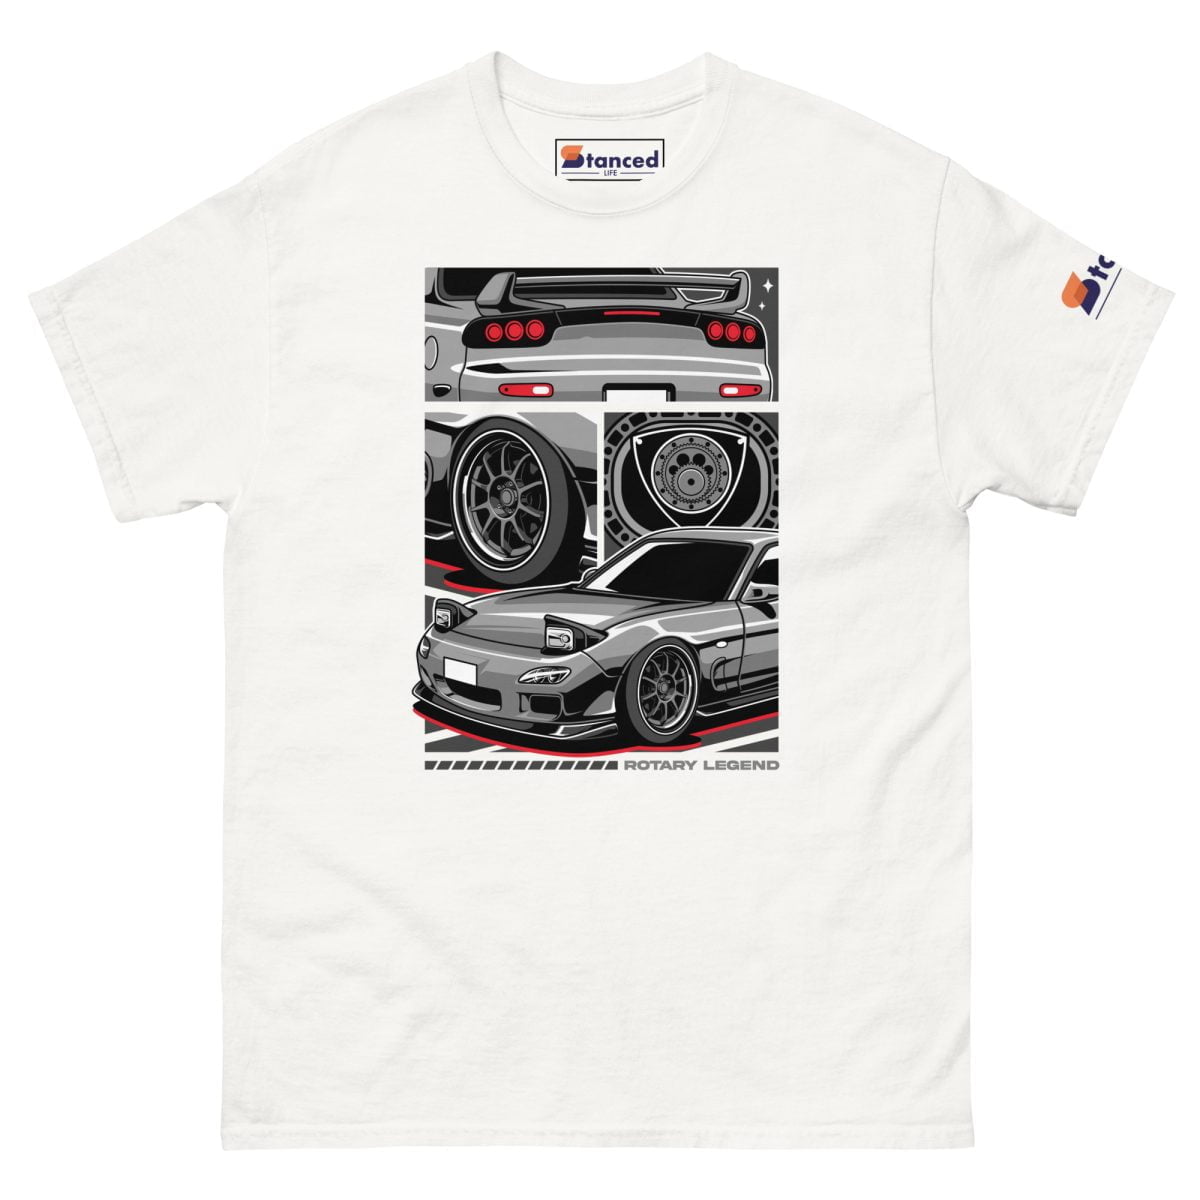 A white Mazda RX7 Car T Shirt Rotary Legend Mens featuring an image of a Mazda RX7 | StancedLife